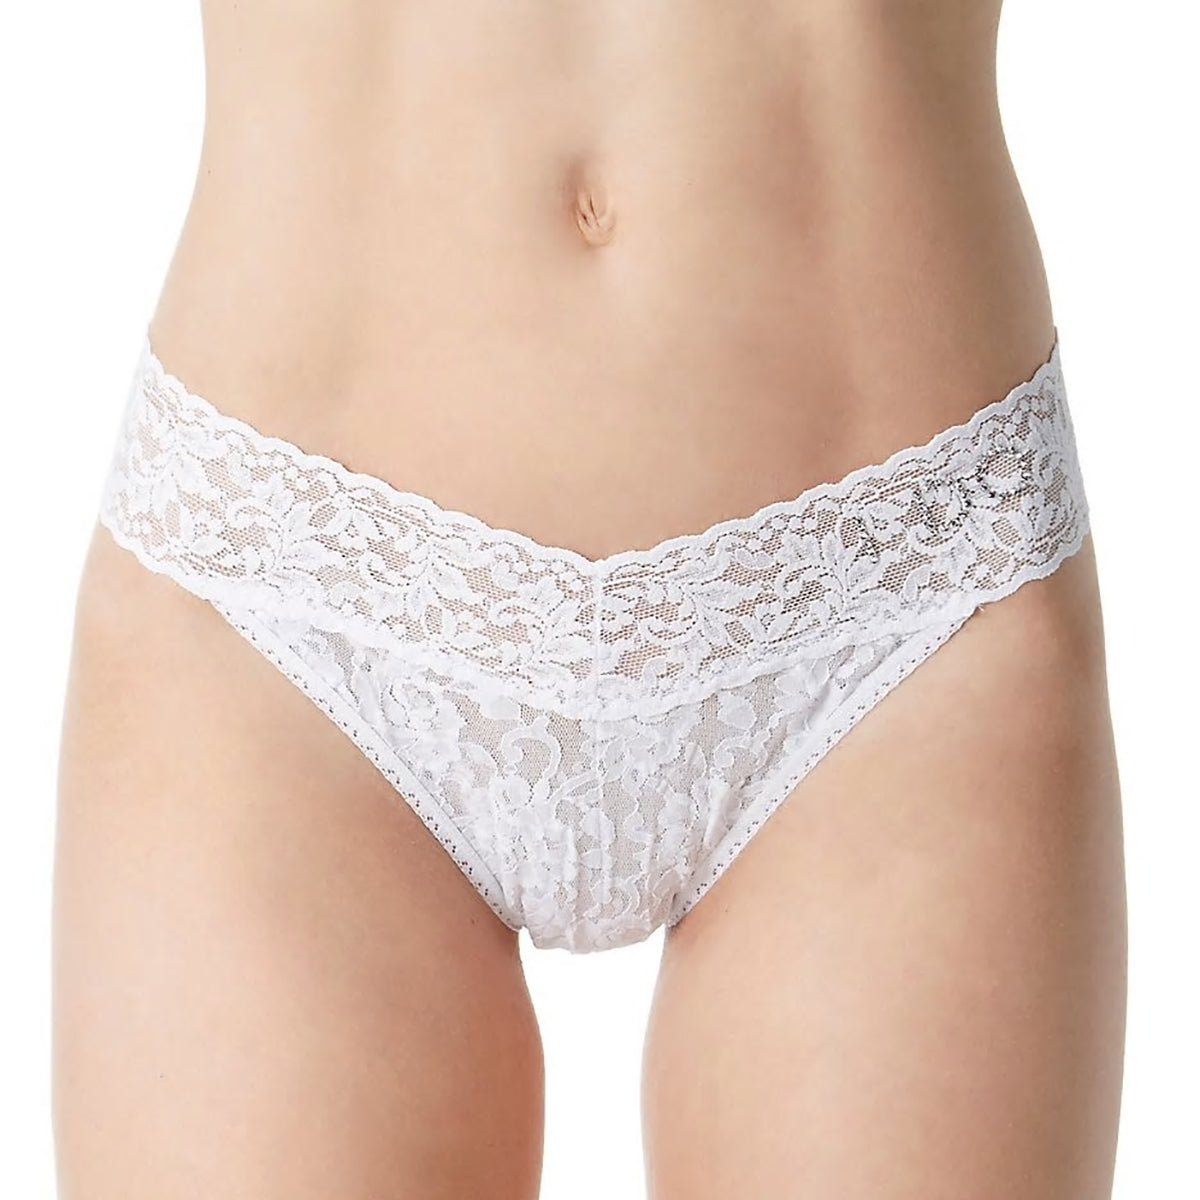 Hanky Panky "I DO" Lace Original Rise Thong Bridal 6511 in White